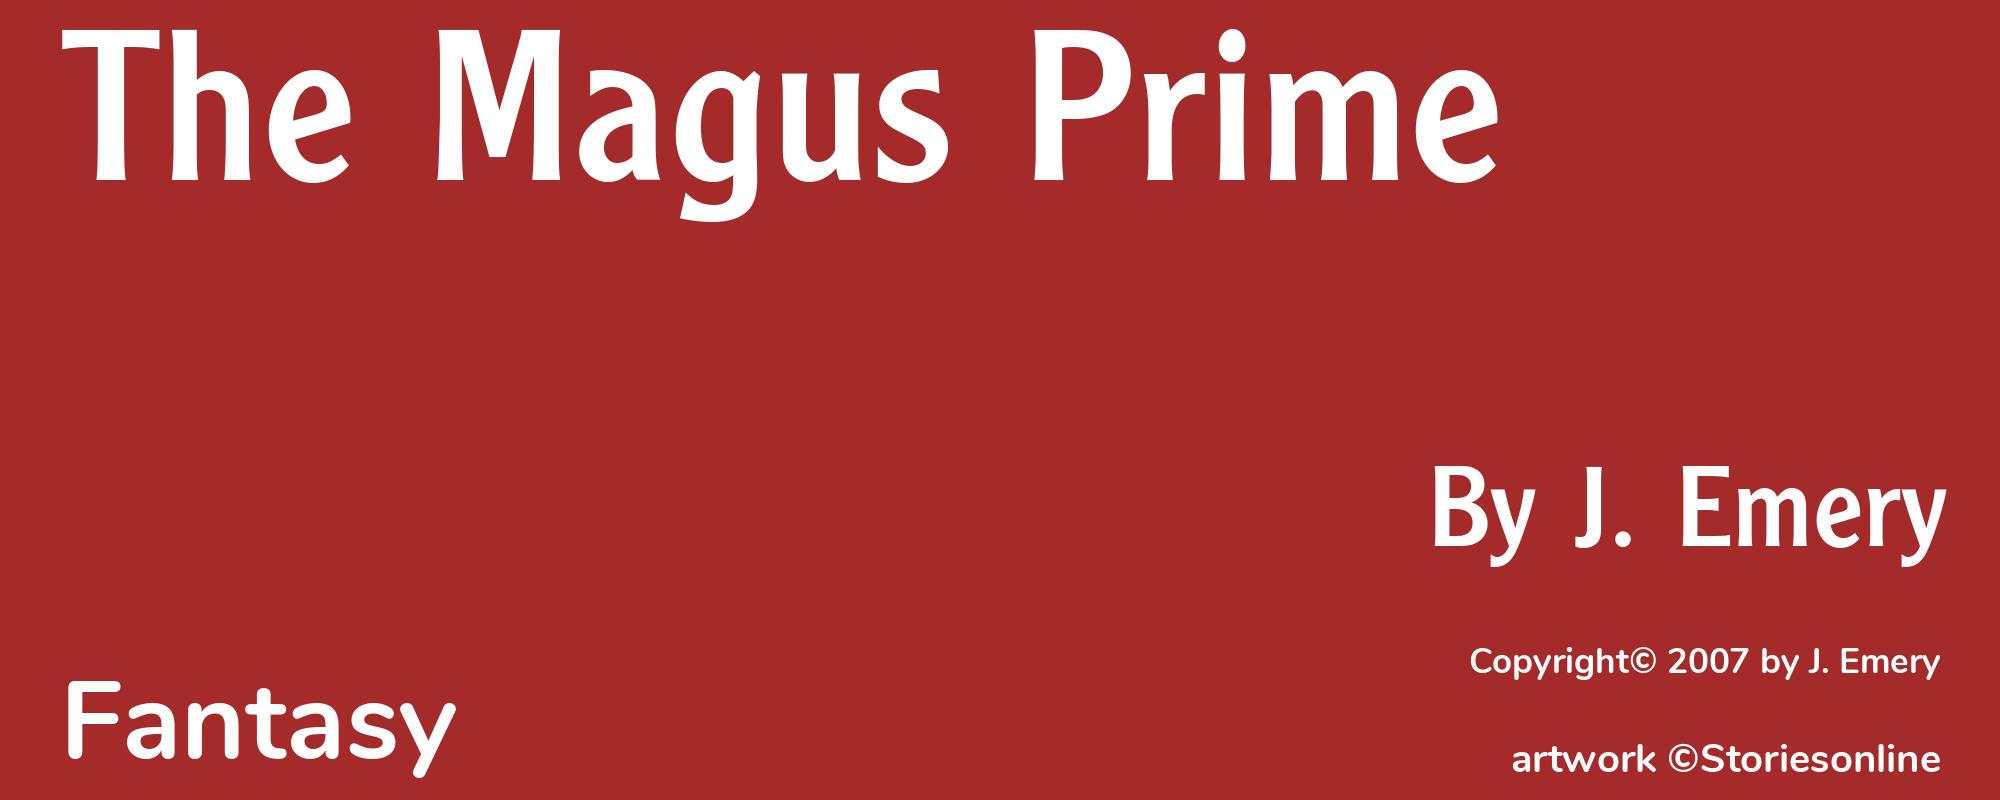 The Magus Prime - Cover